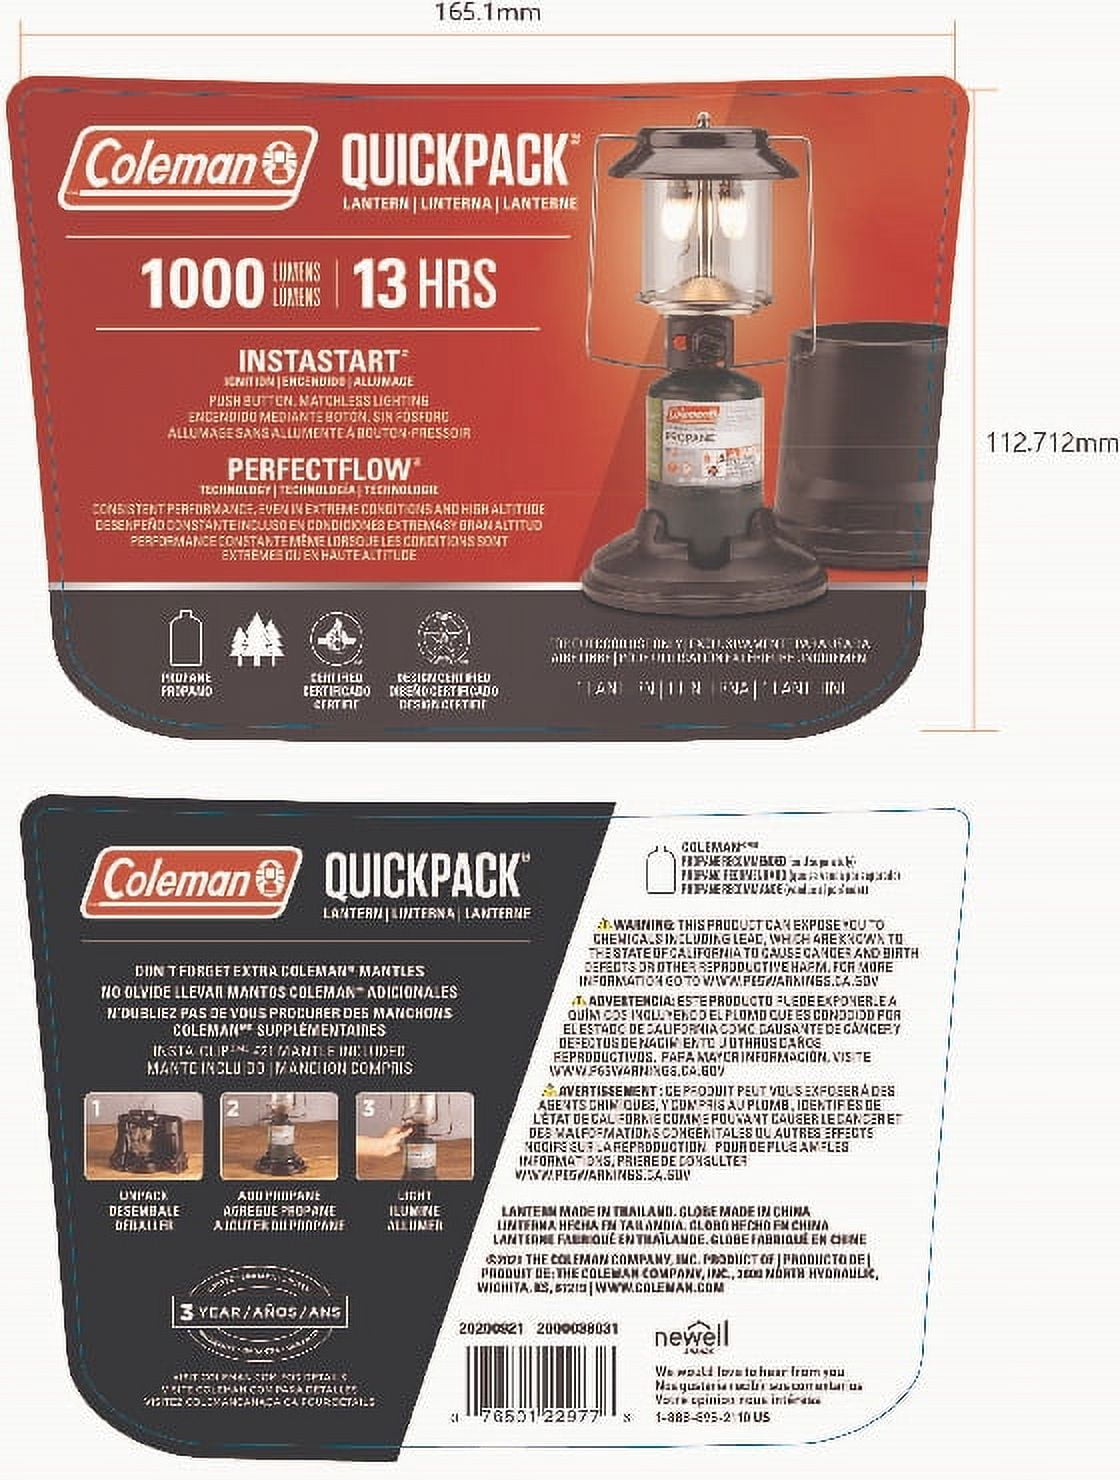 Coleman QuickPack 810 Lumens 2-Mantle Propane Lantern with Carry